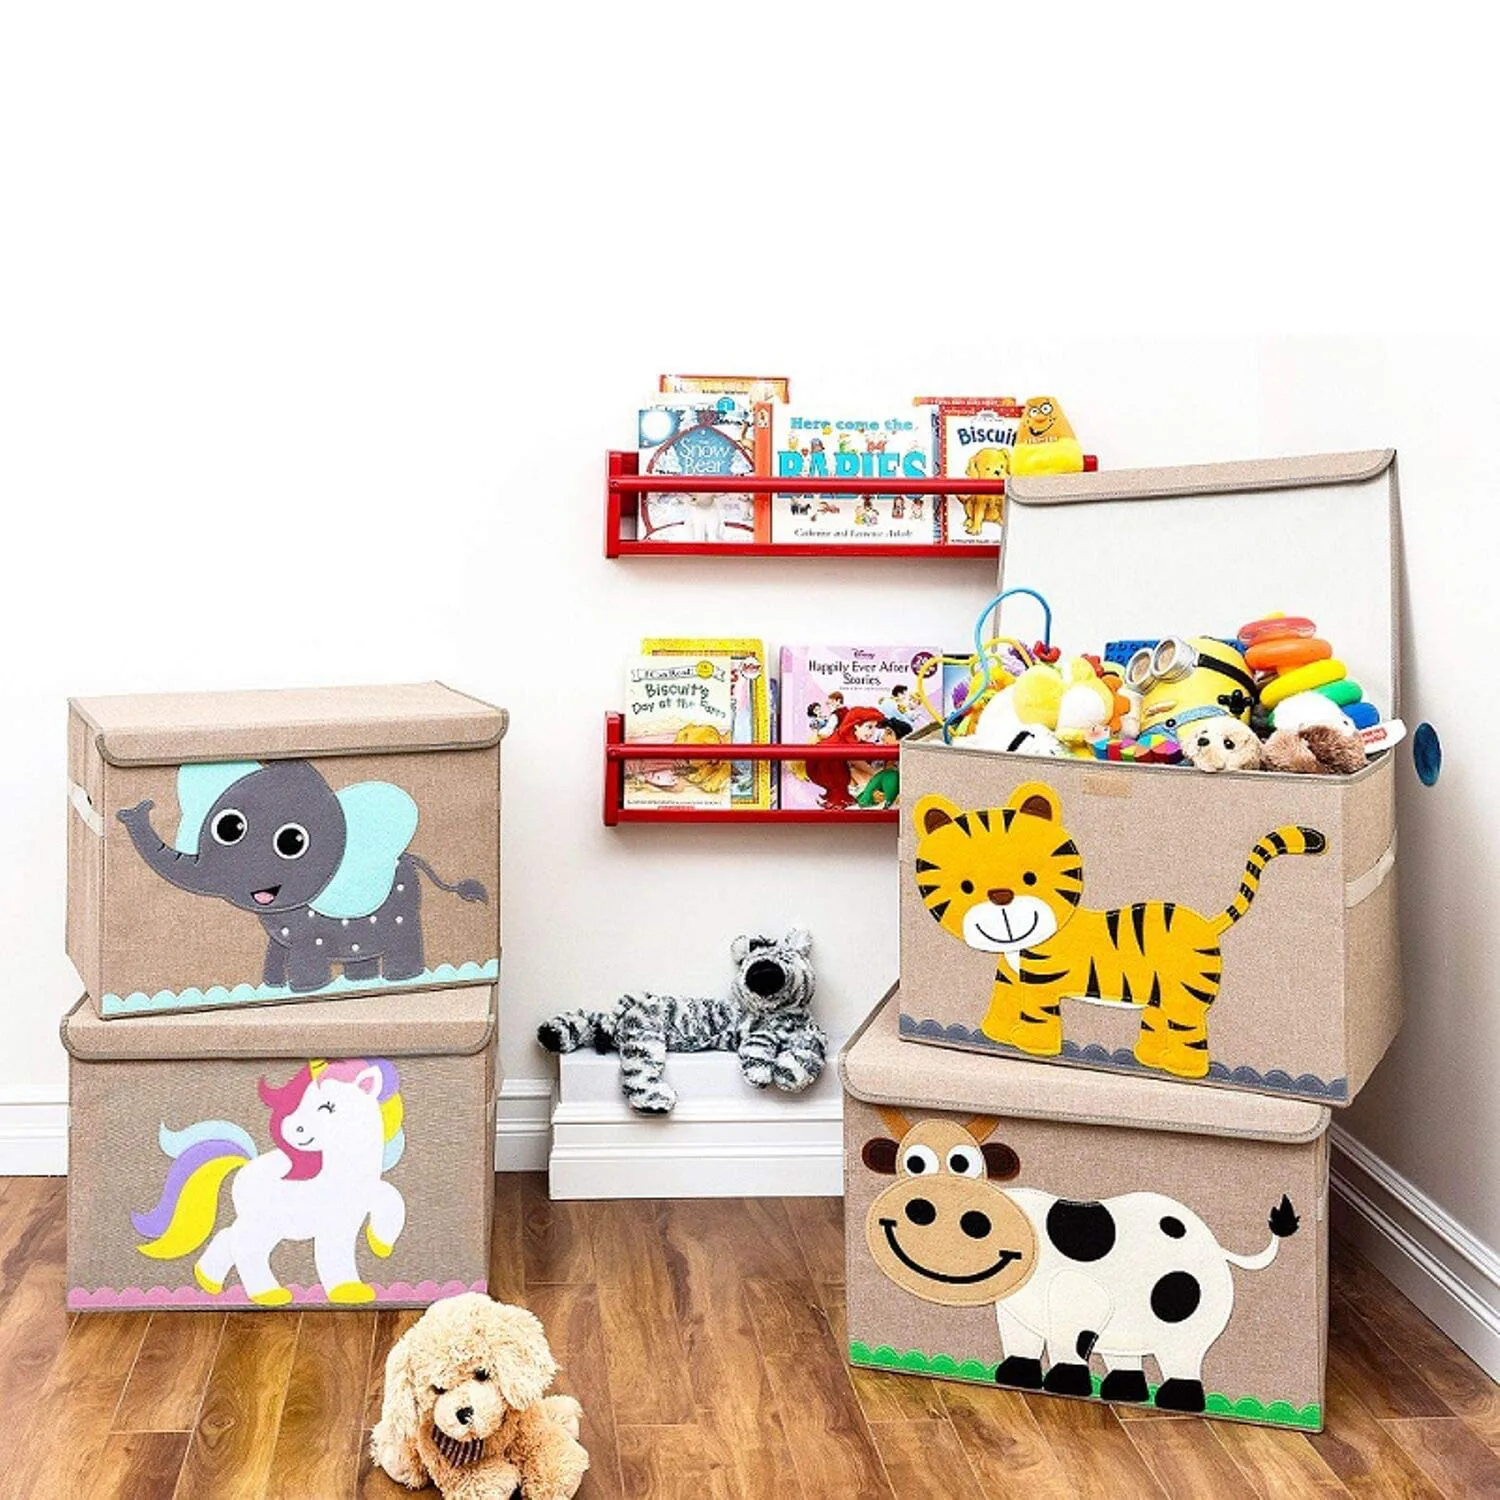 Collapsible Fabric Animal Toy Storage Organizer/Bin/Box/Basket/Trunk for Toddler Children and Baby Nursery CLCROBD Foldable Large Kids Toy Chest with Flip-Top Lid Elephant 